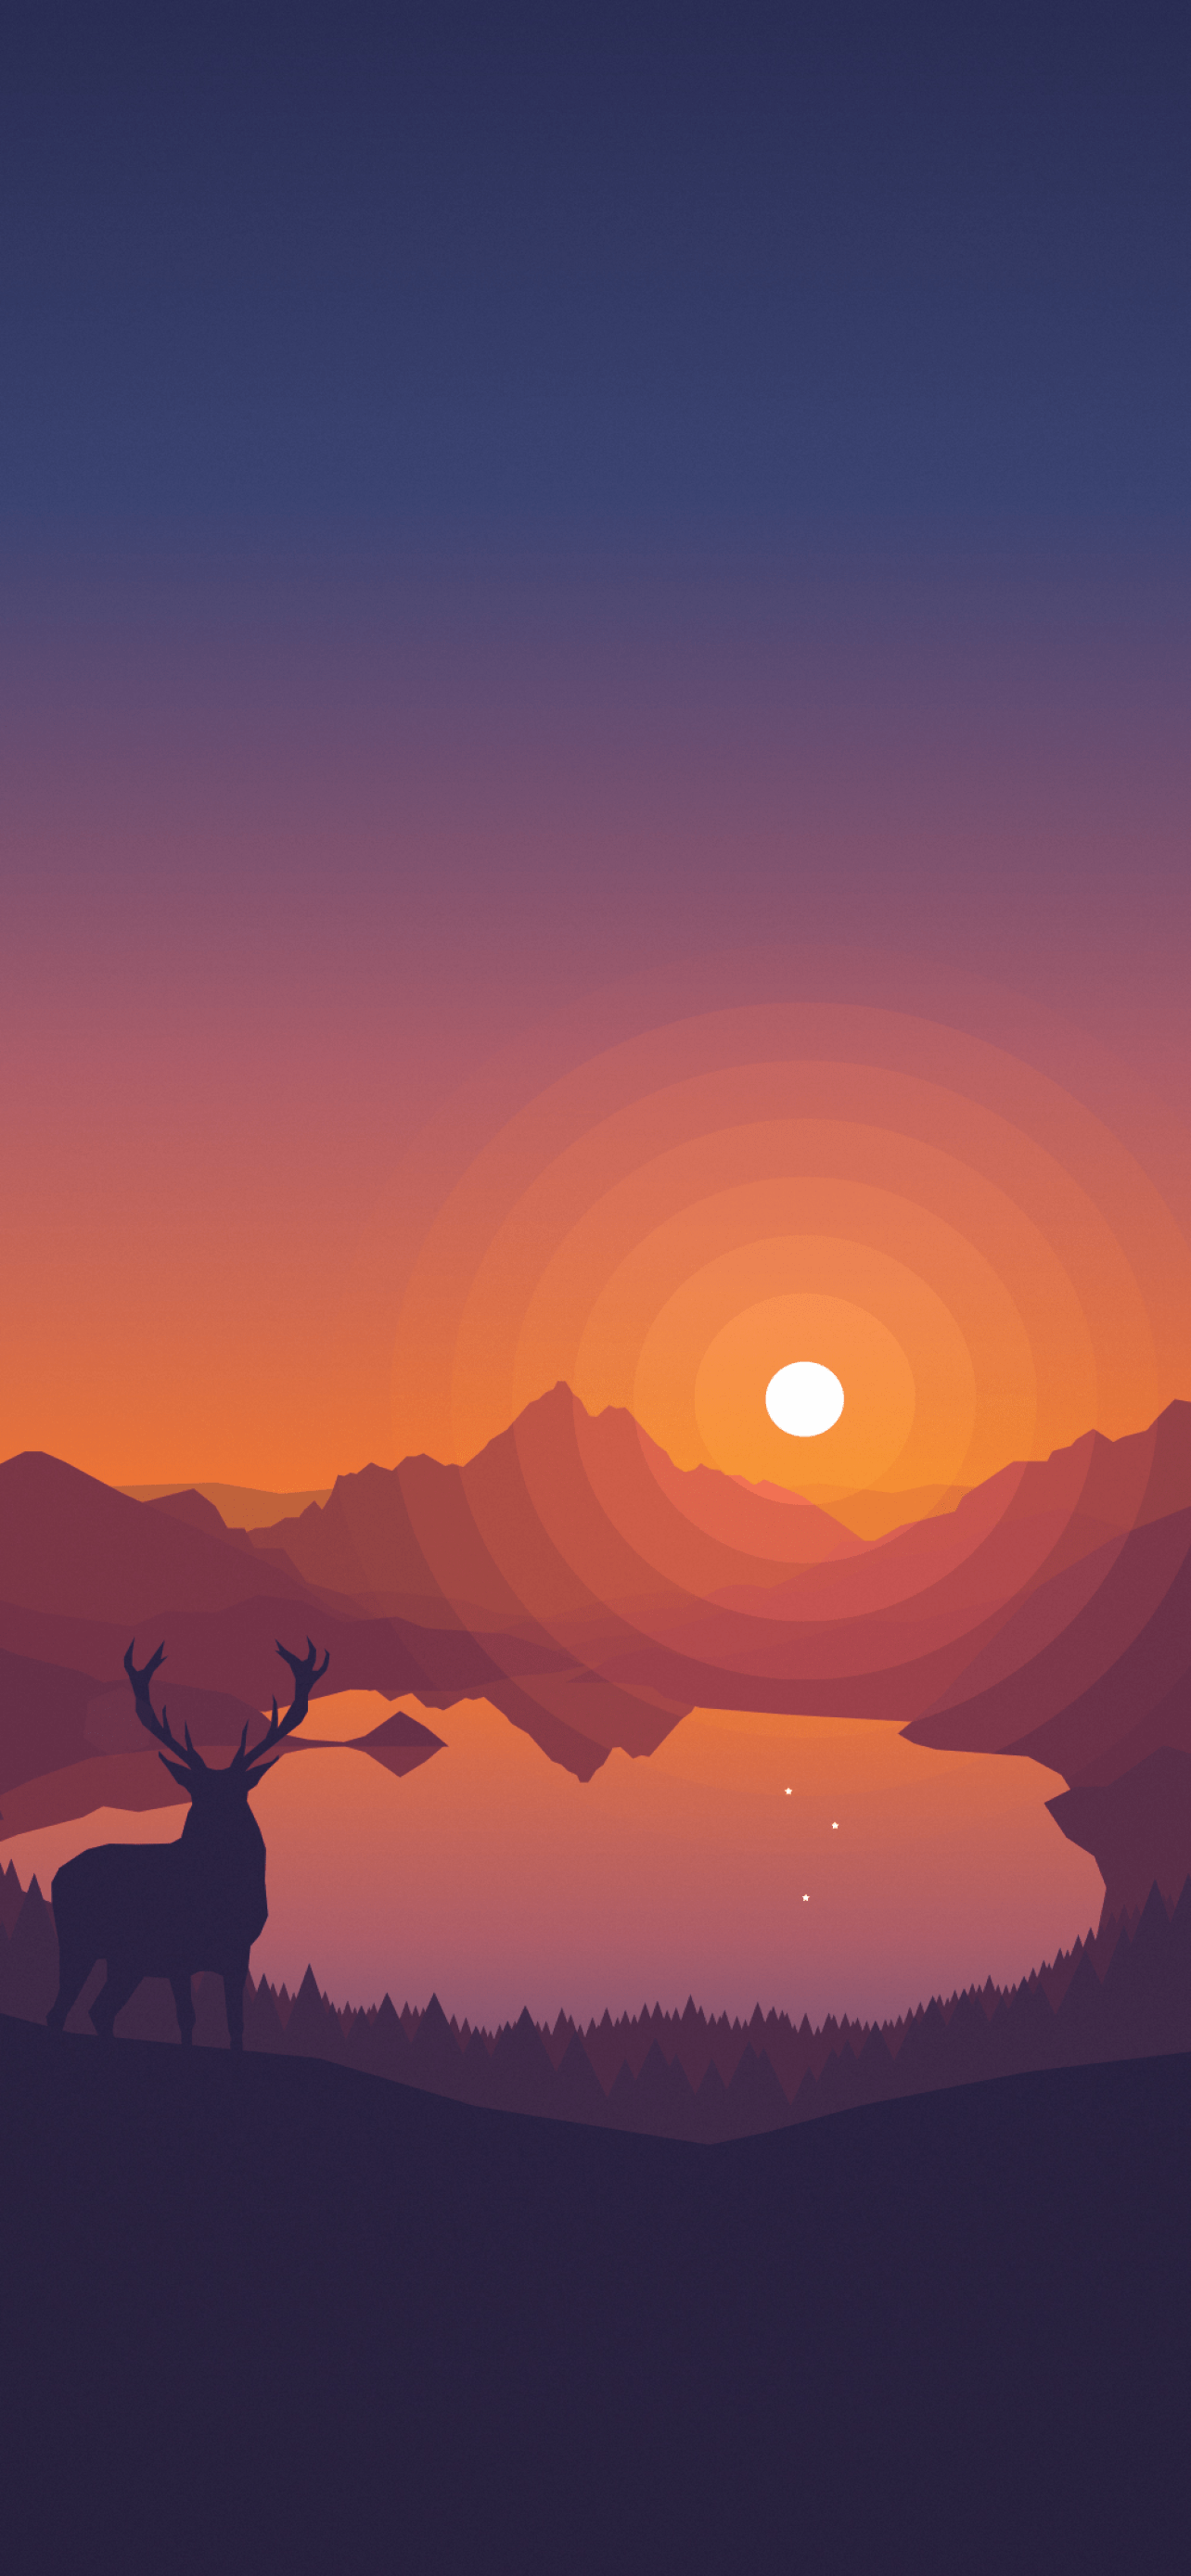 A deer in the woods during a sunset - Deer